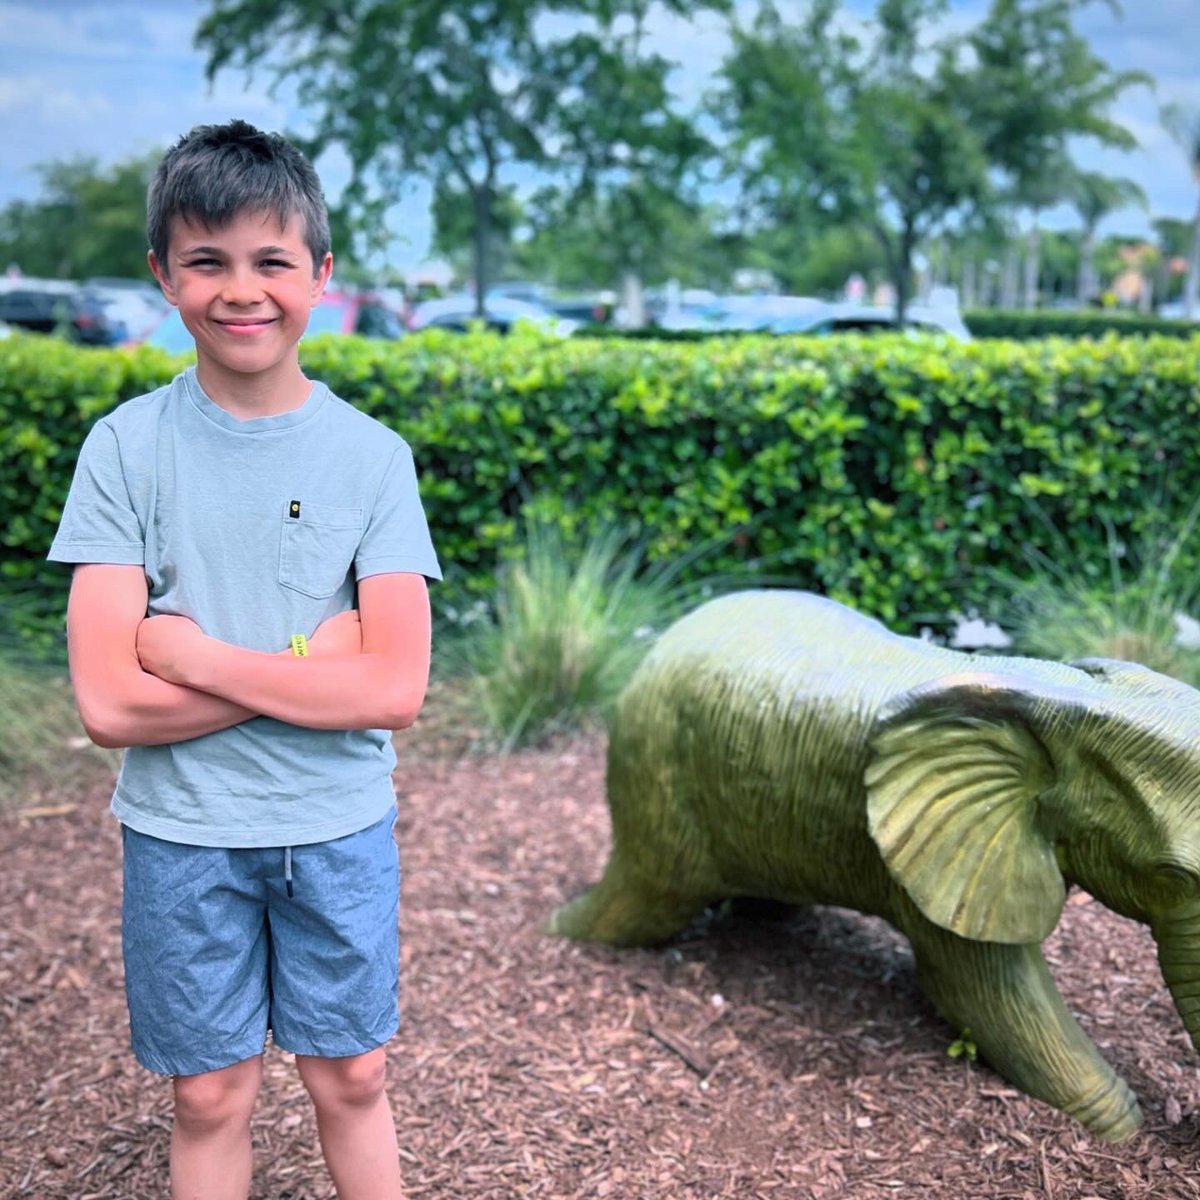 Last day in Orlando…this trip was SO MUCH fun!! We will miss all the outdoor activities and beautiful warm weather. Will definitely be back soon … #florida #family #vacation #travel# #disney #springbreak #orlando #disneyworld